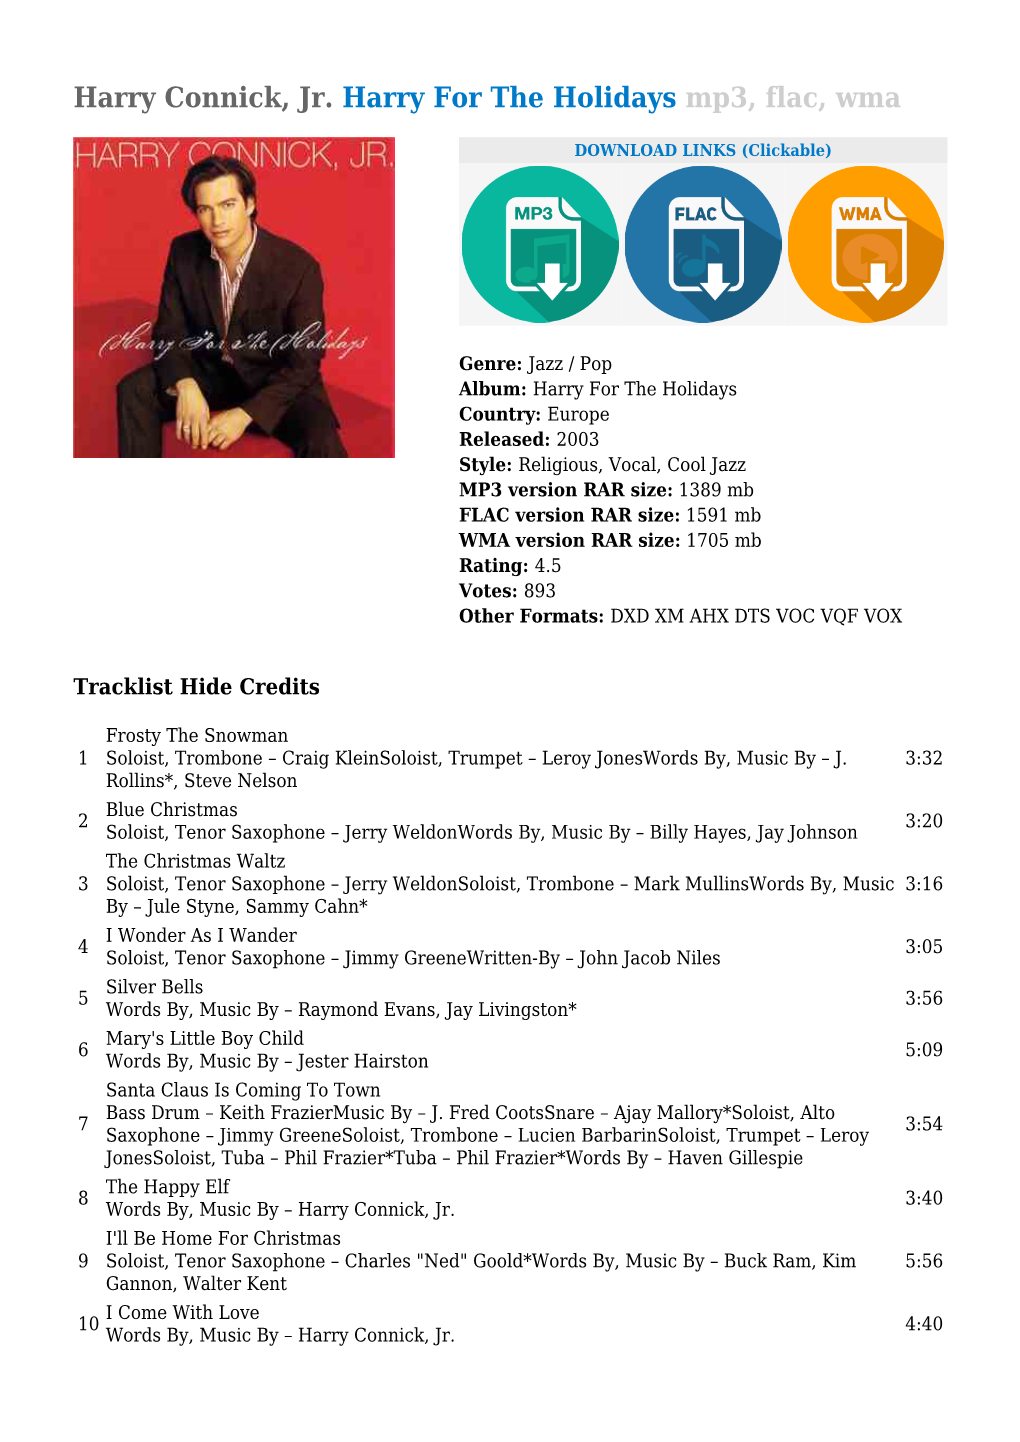 Harry Connick, Jr. Harry for the Holidays Mp3, Flac, Wma